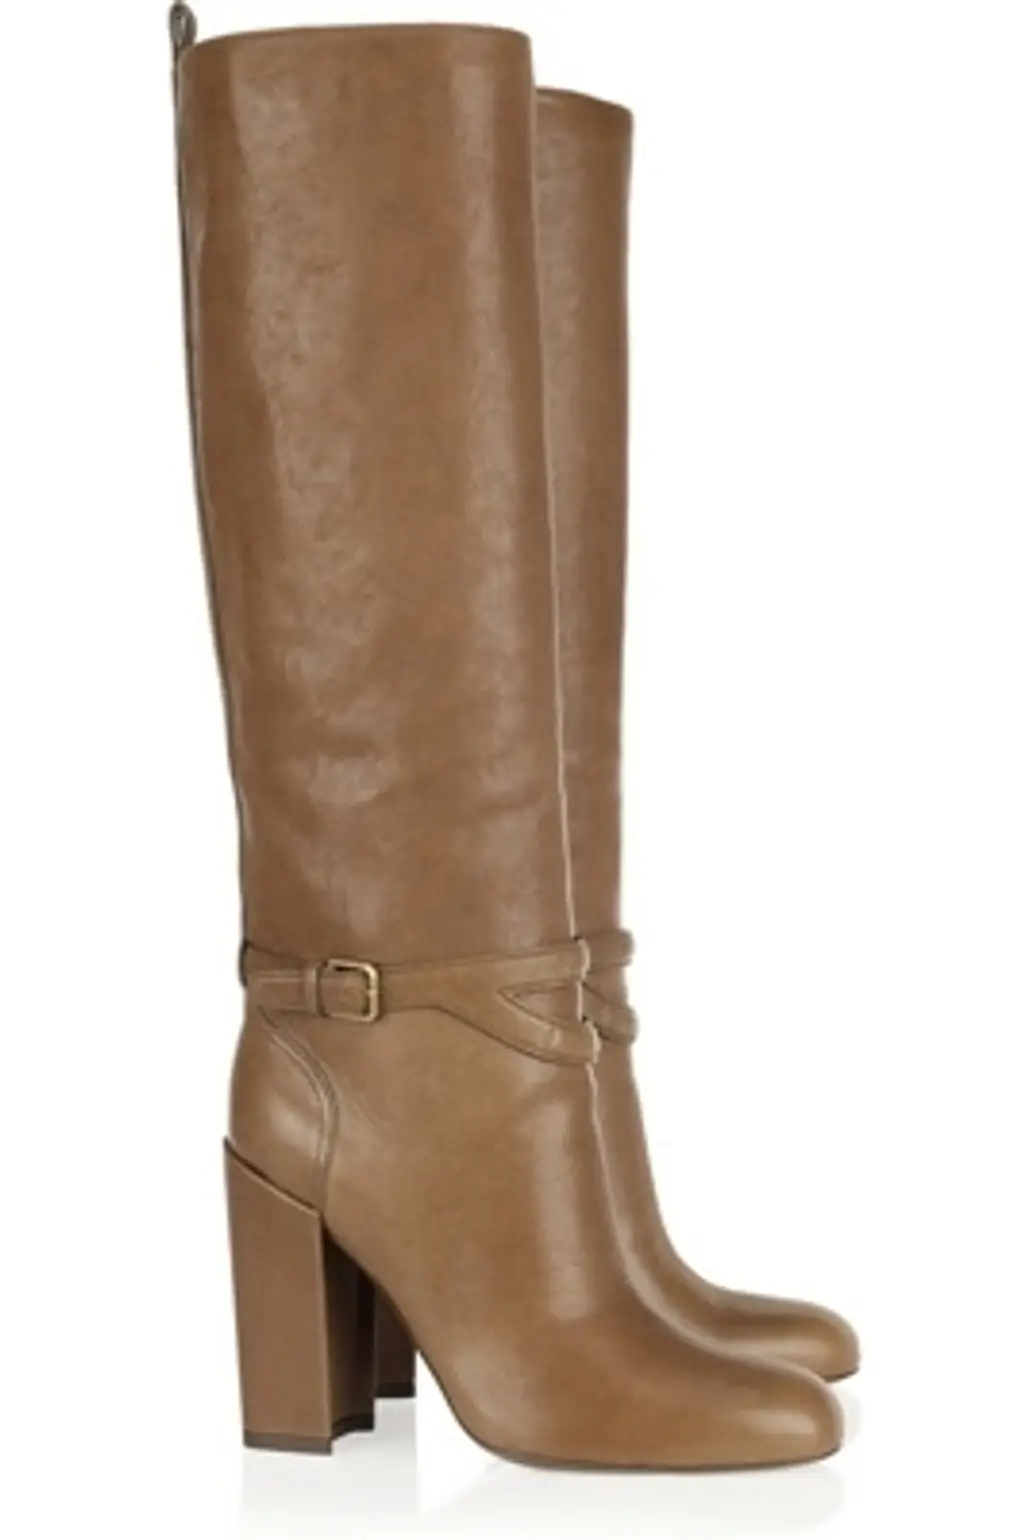 Yves Saint Laurent New Chyc Leather Knee High Boots